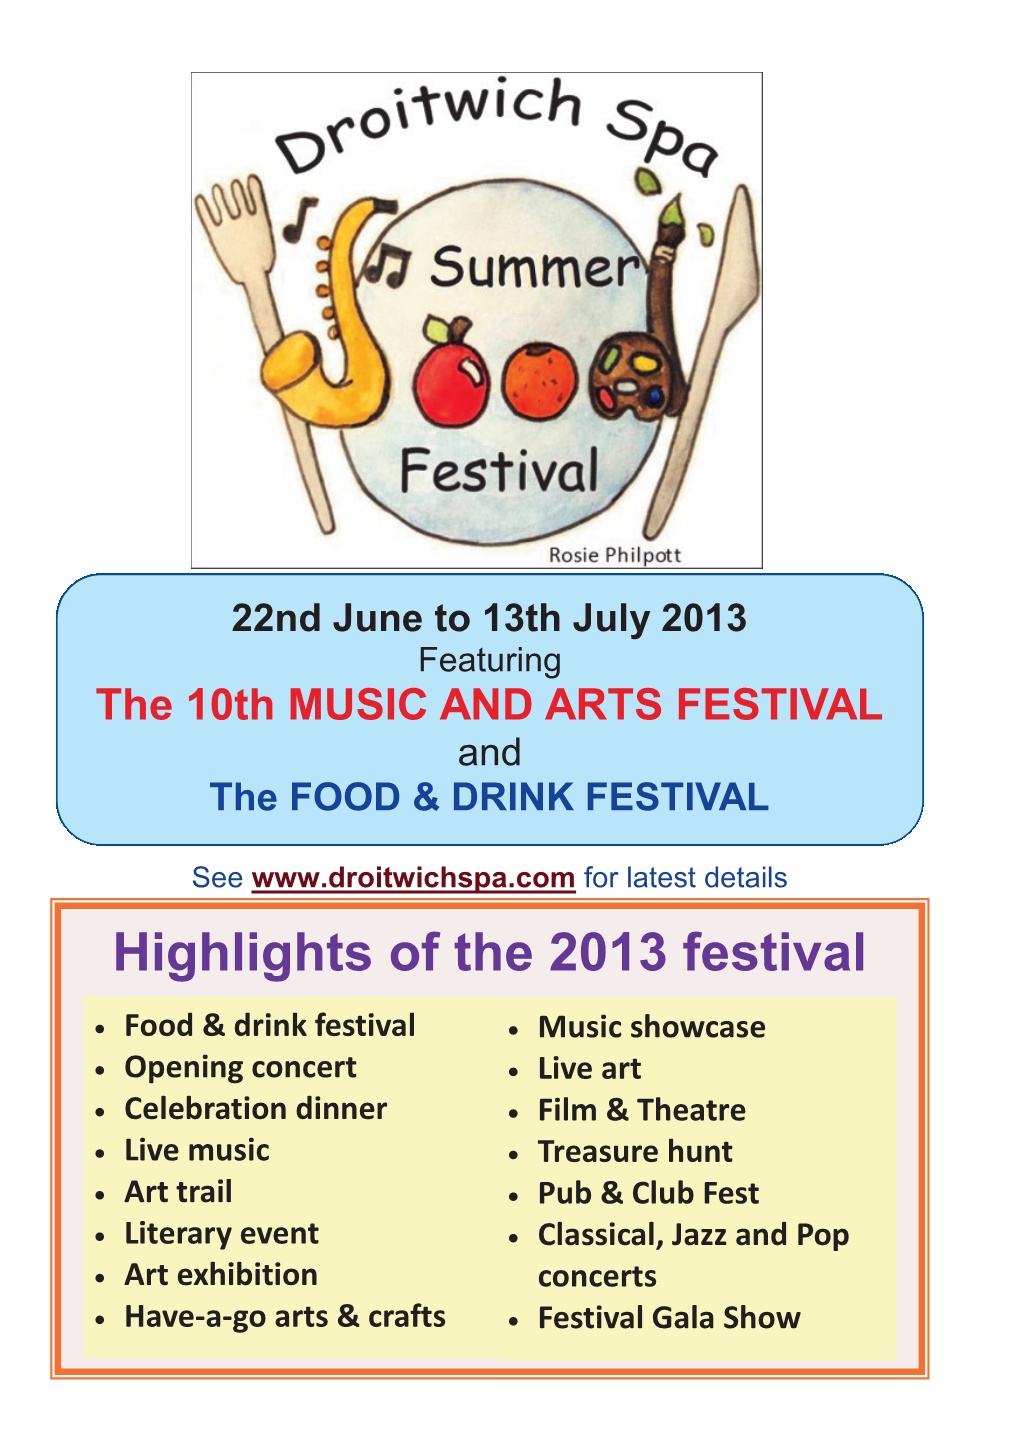 22Nd June to 13Th July 2013 Featuring the 10Th MUSIC and ARTS FESTIVAL and the FOOD & DRINK FESTIVAL